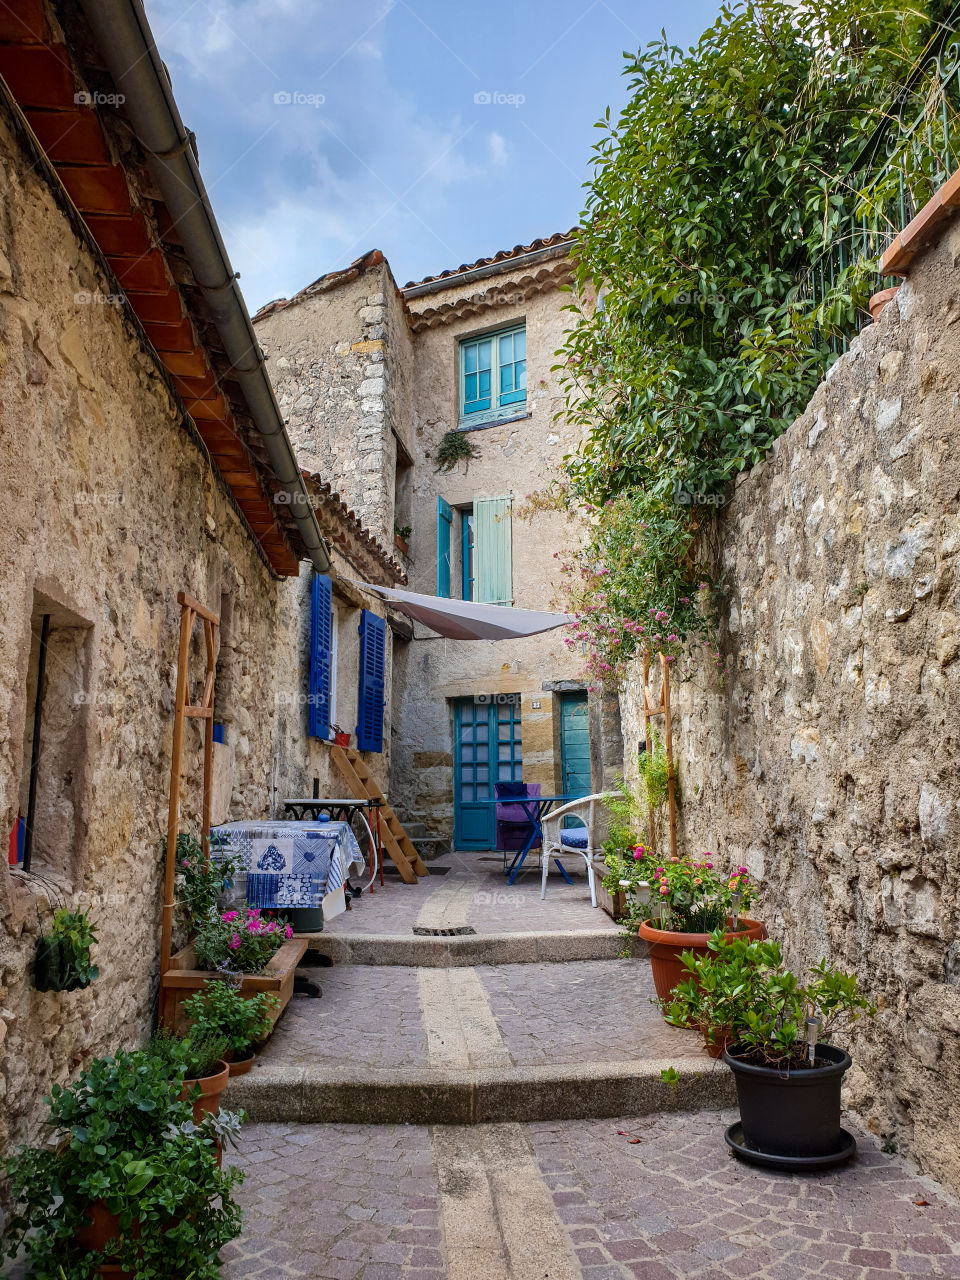 A small alley in a village of the south of France